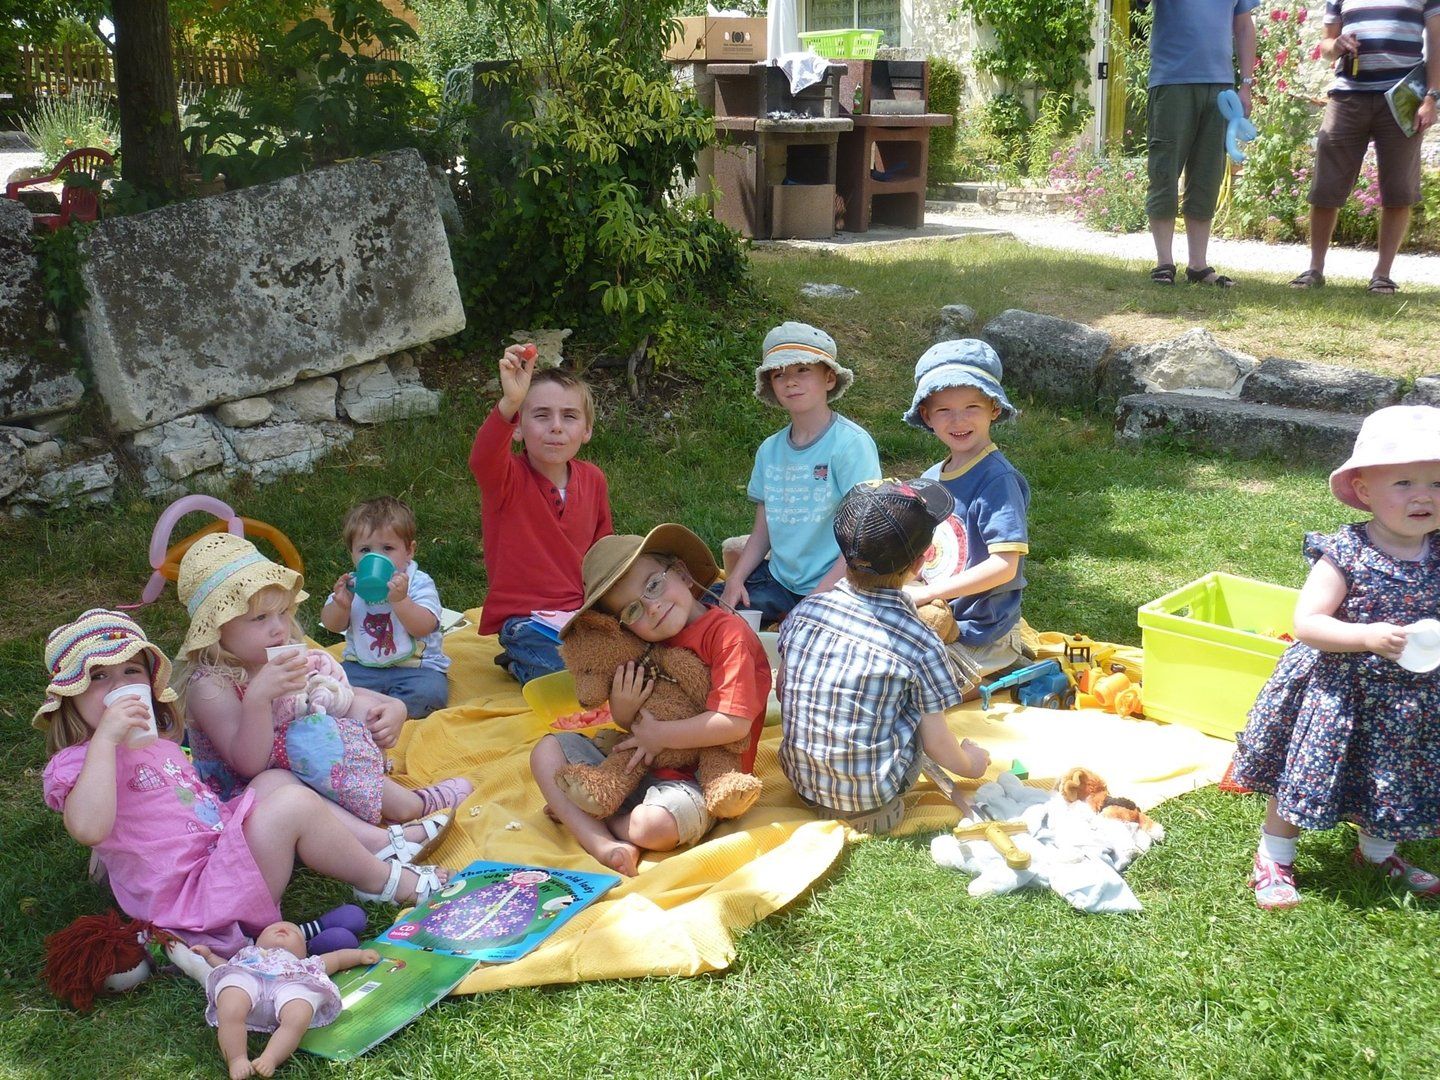 a group of young children having a picnic